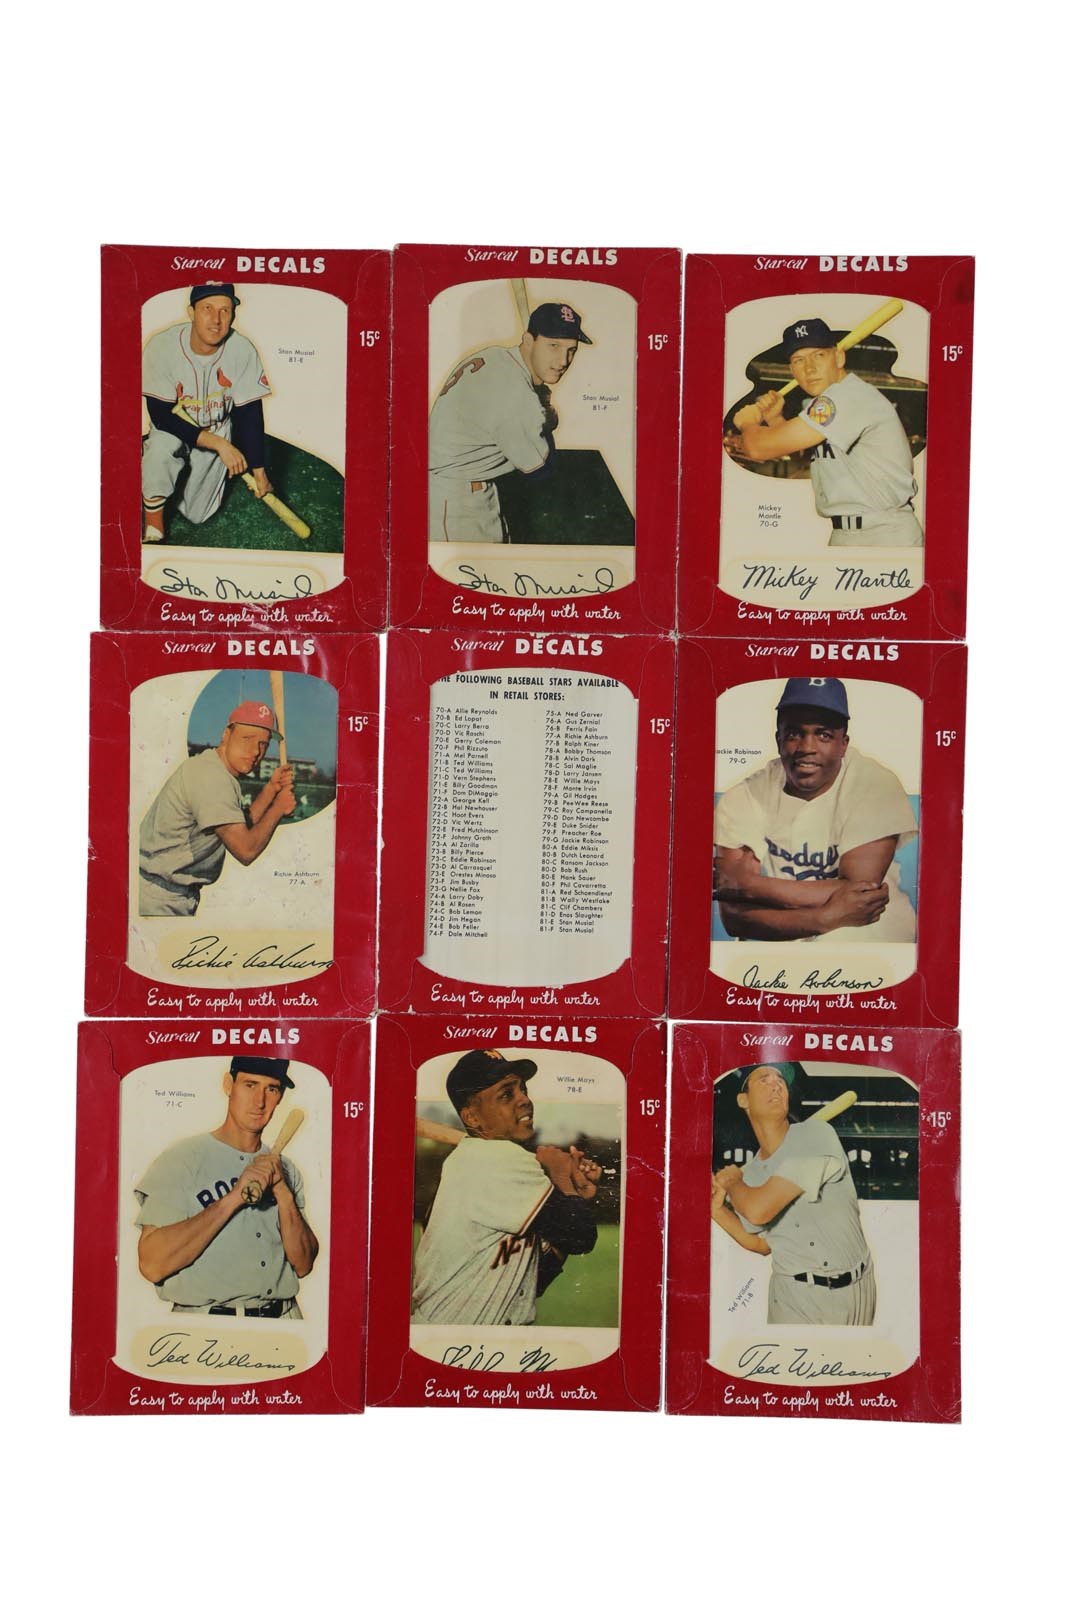 1952 Star-Cal Decals Type 1 Complete Set with Mickey Mantle & Checklist - Most Complete Set Ever Sold (71/71)